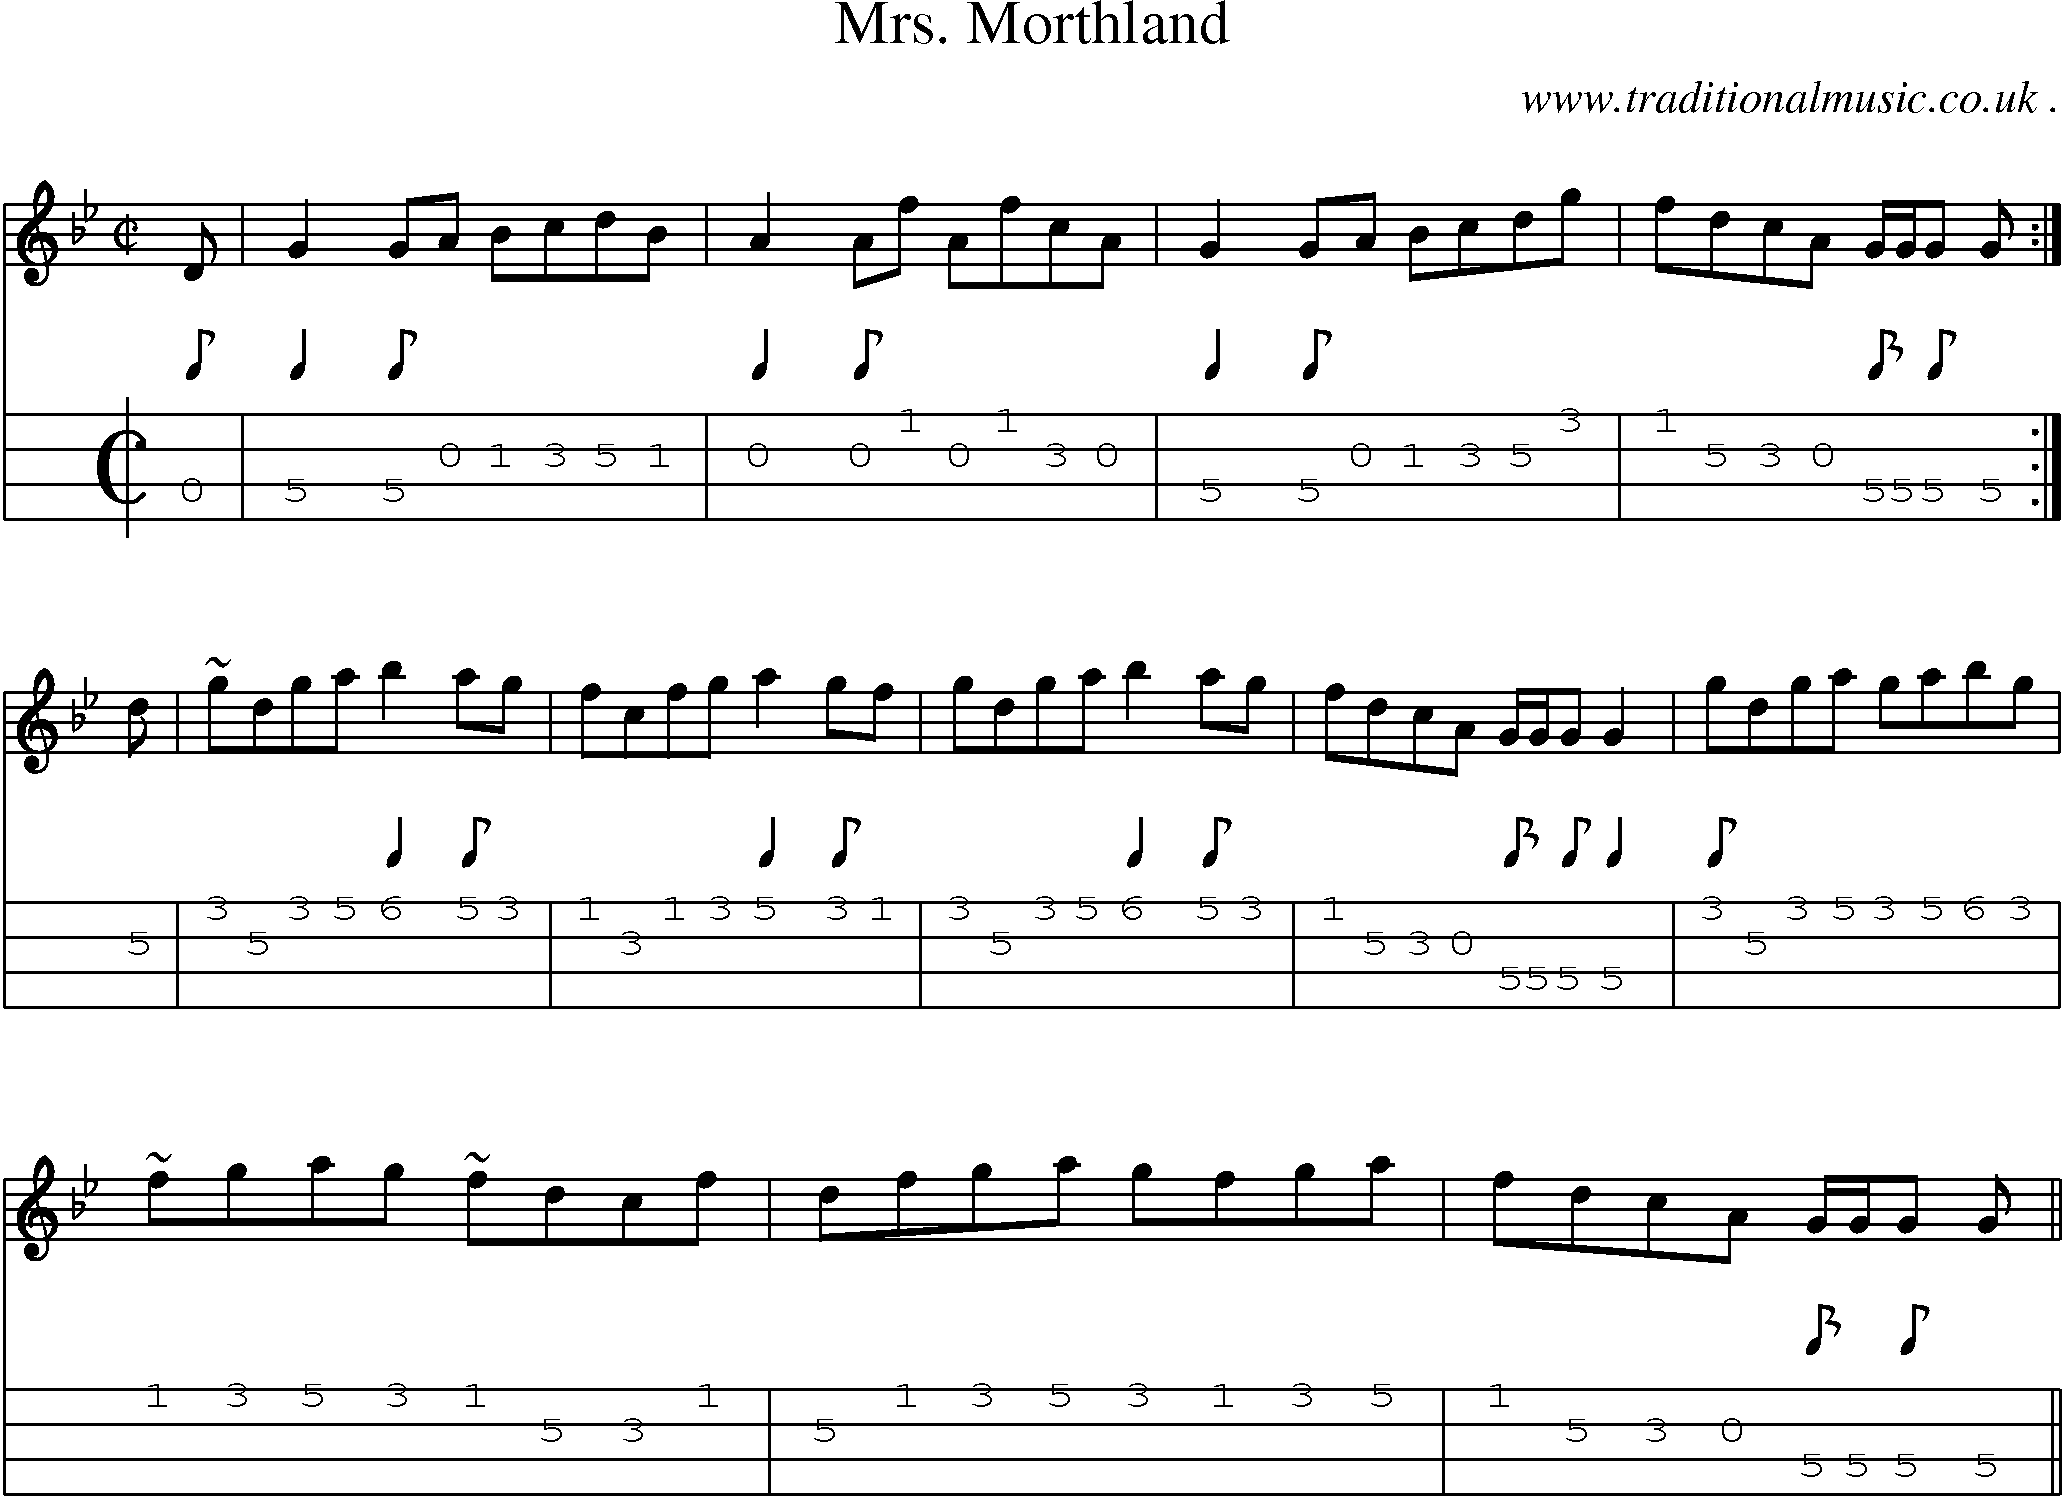 Sheet-music  score, Chords and Mandolin Tabs for Mrs Morthland